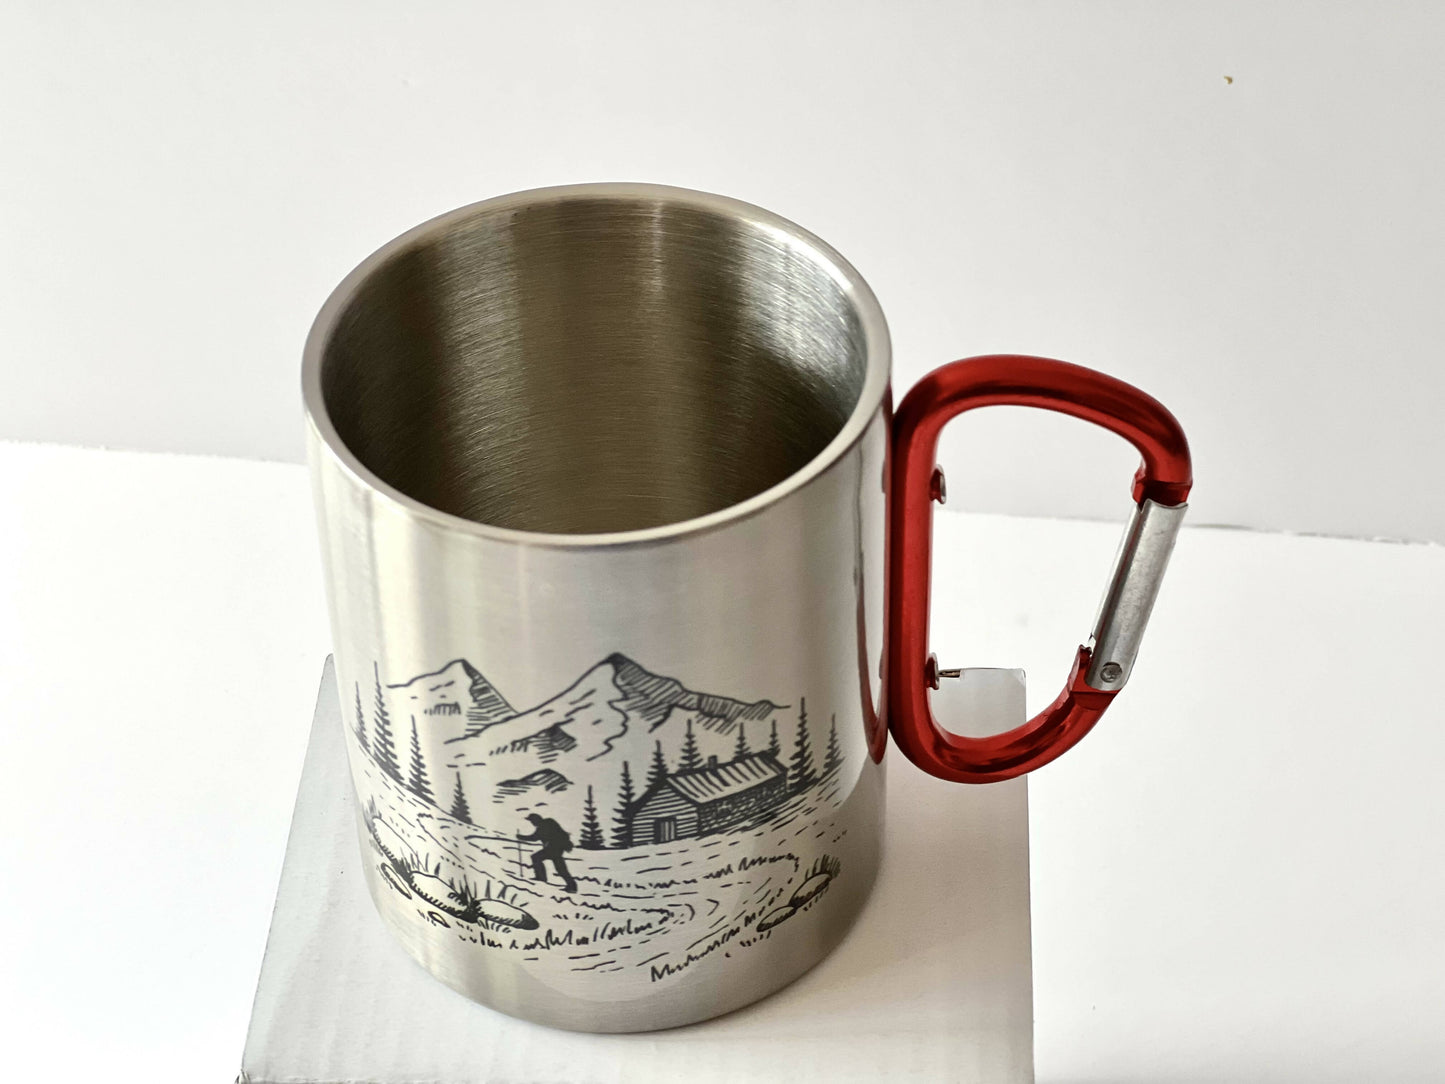 Stainless steel mug with red carabiner clip